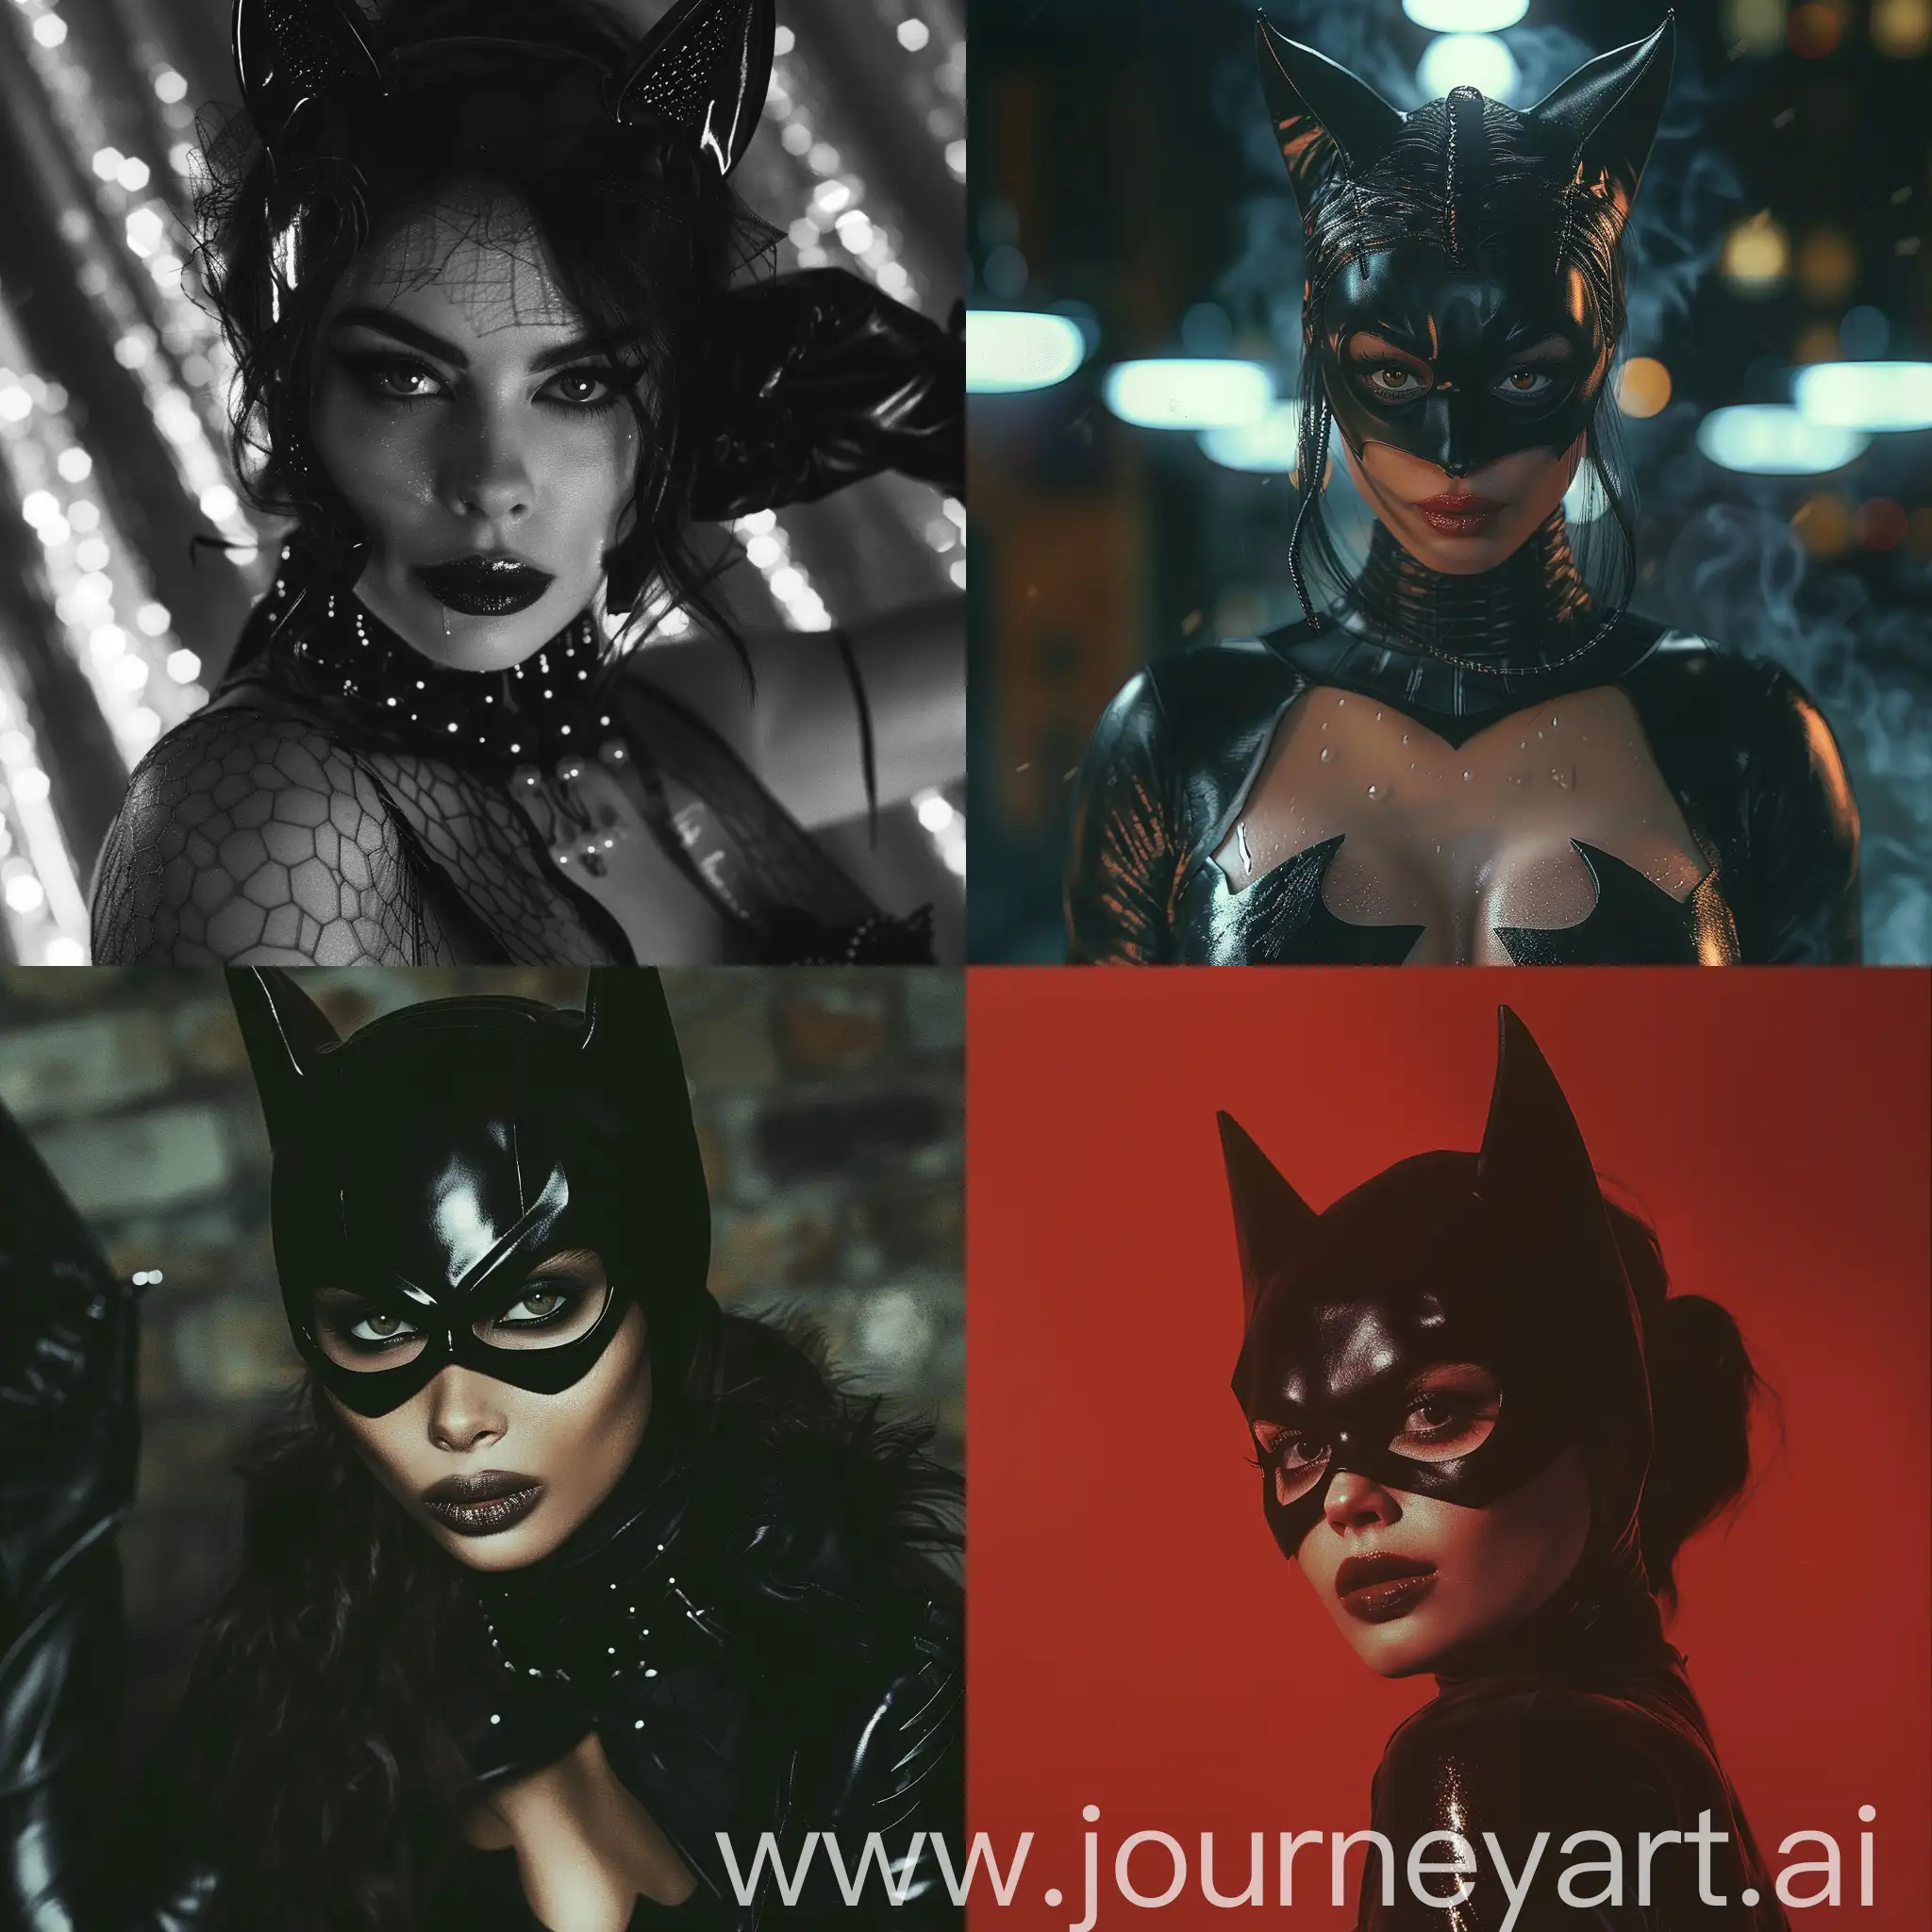 cocaine catwoman, exposing her inner darkness